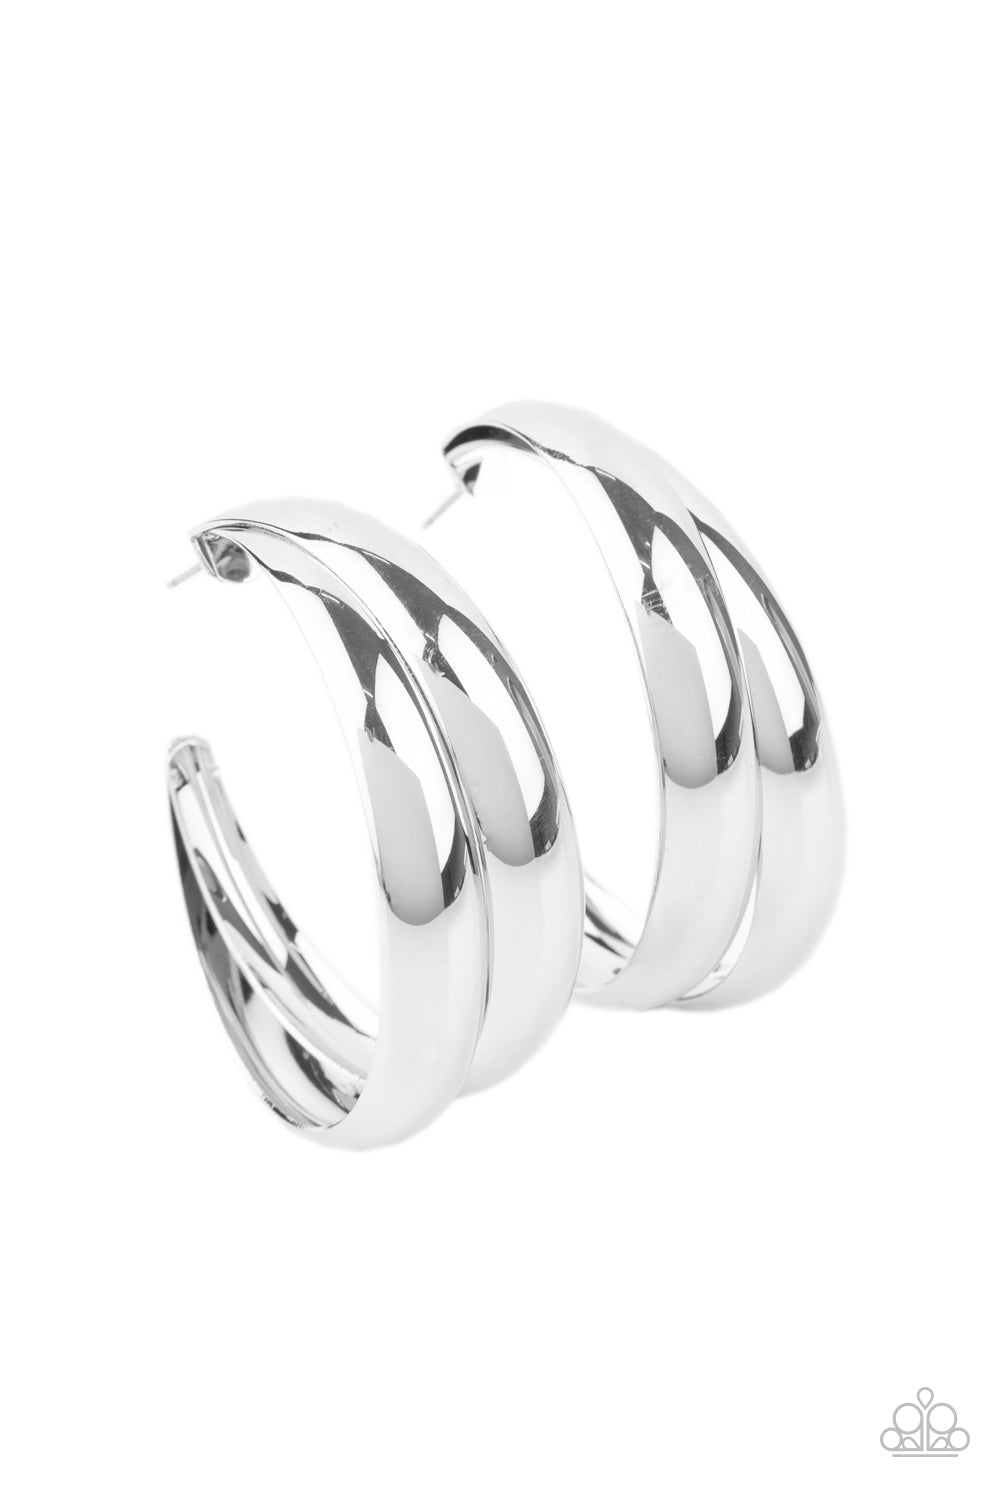 Paparazzi Earrings - Colossal Curves - Silver Hoop